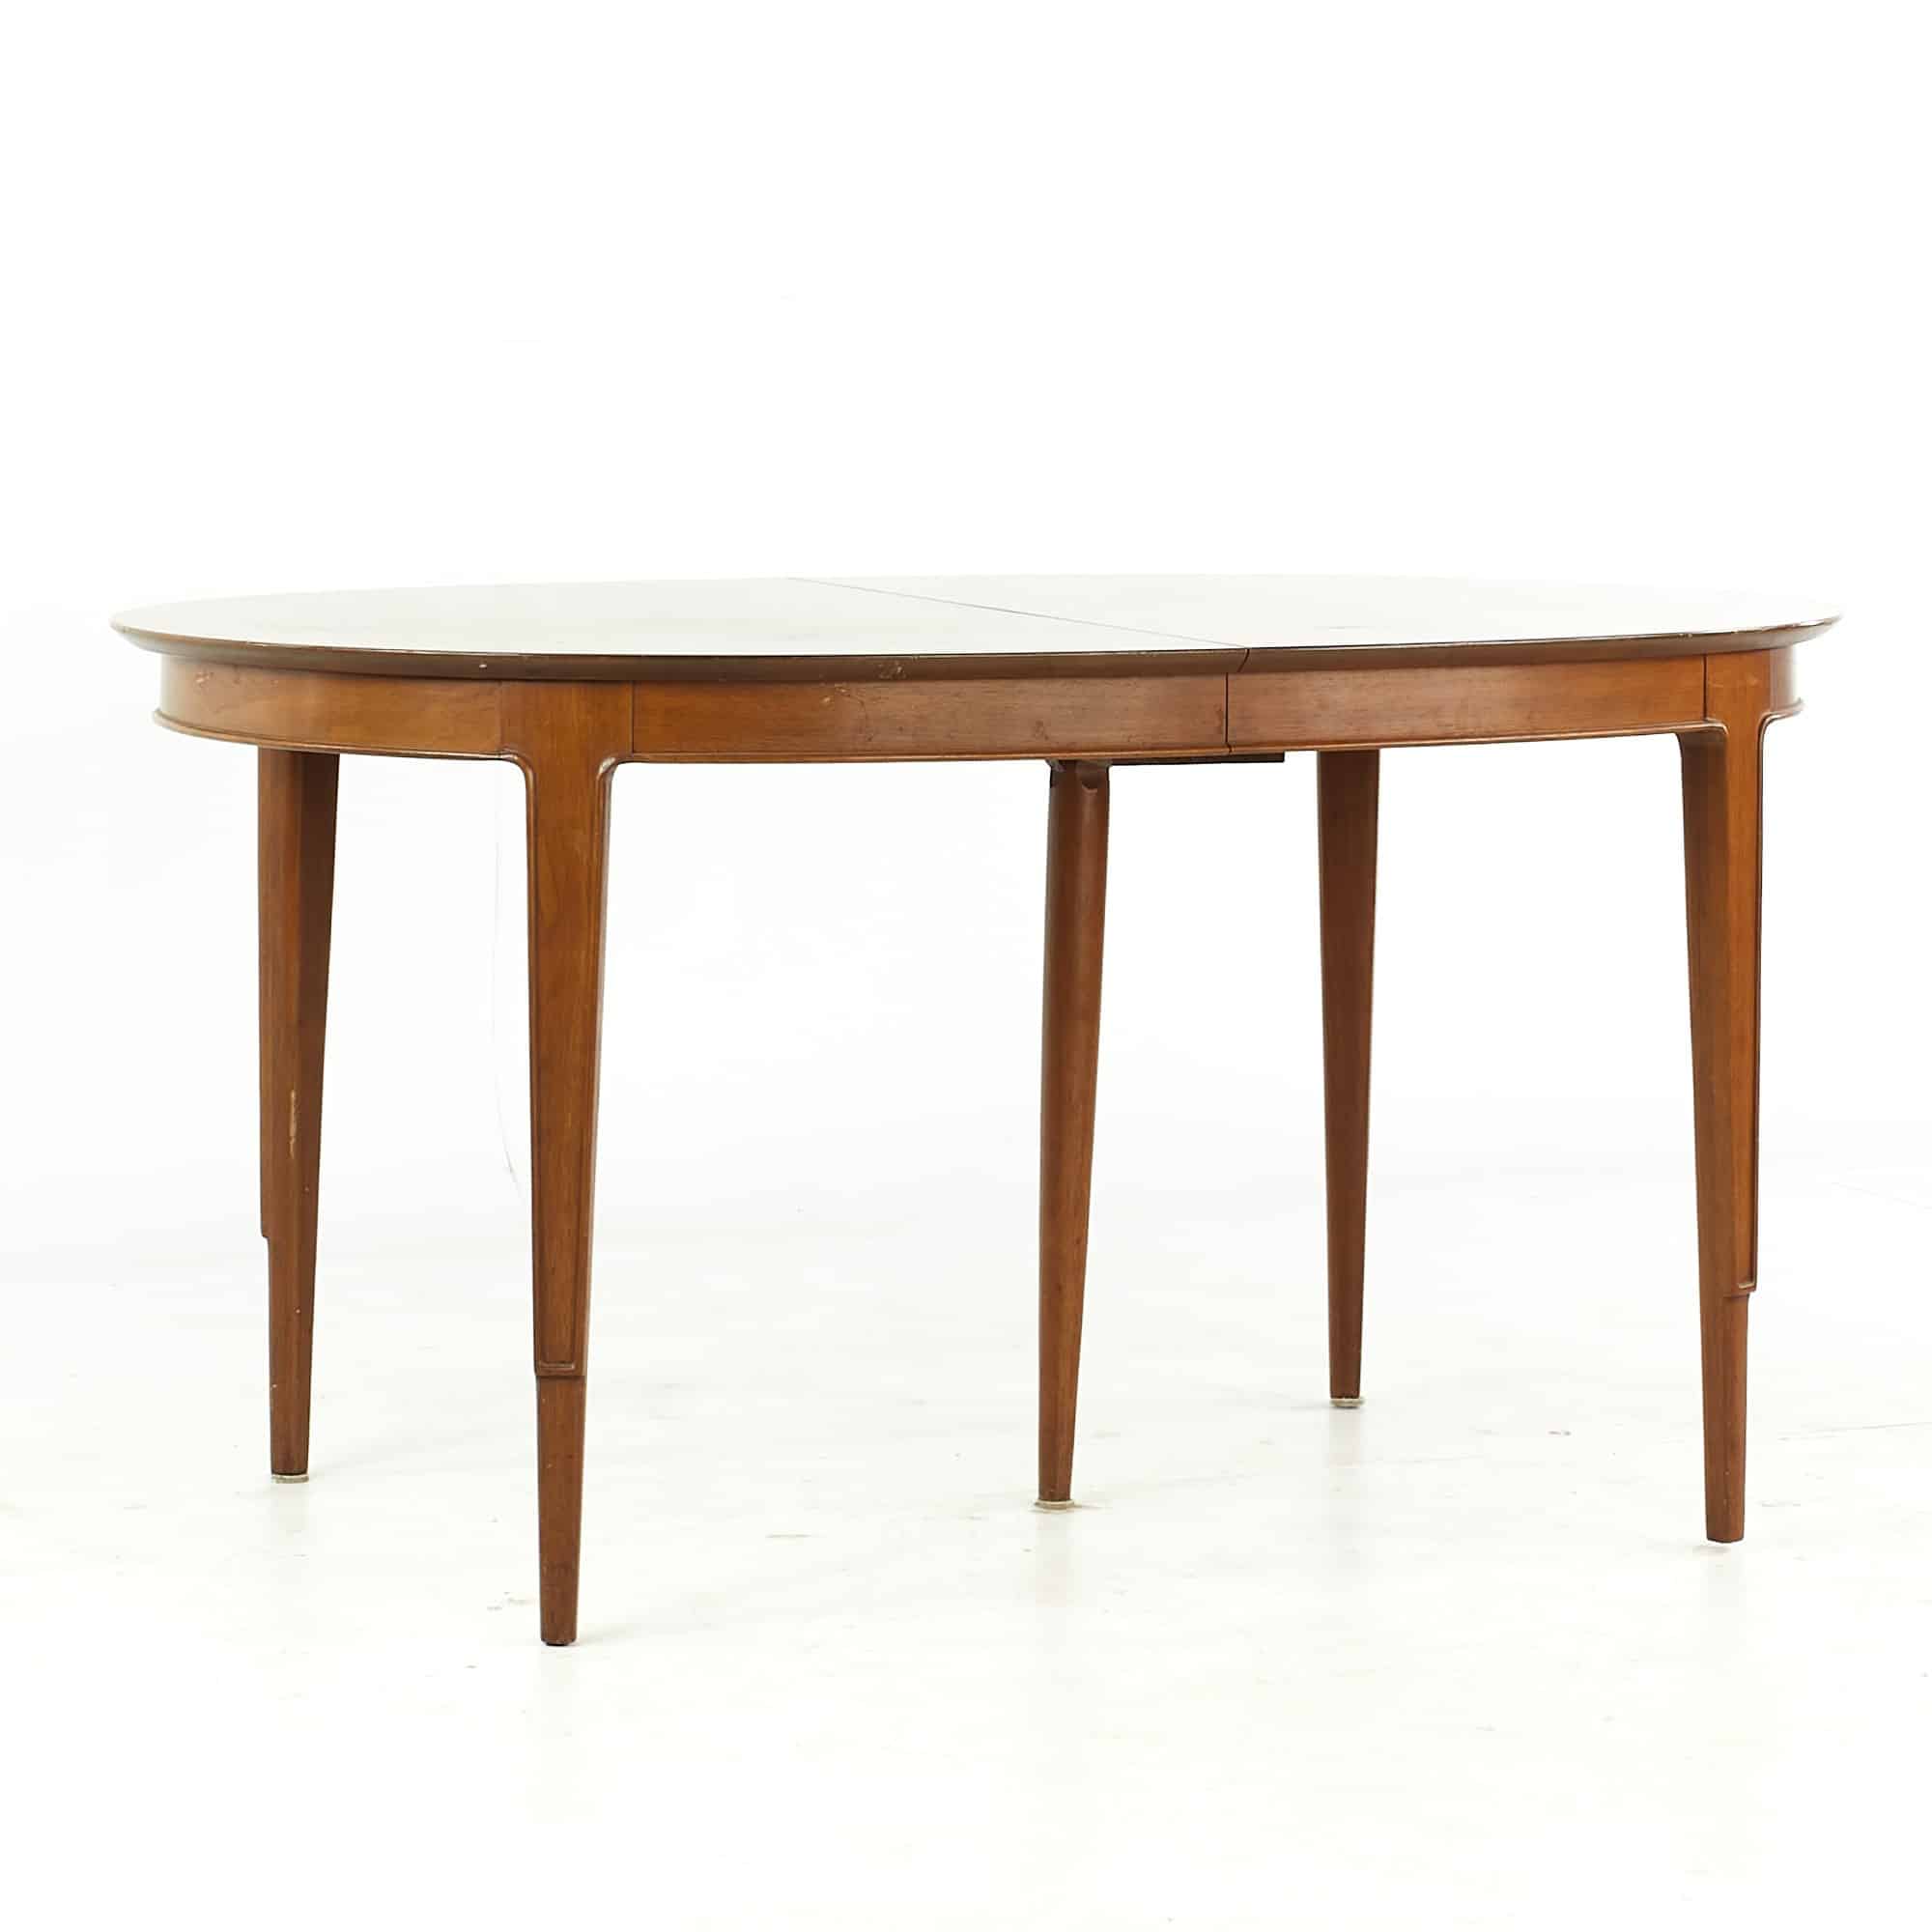 Mount Airy Janus Mid Century Walnut Dining Table with 3 Leaves